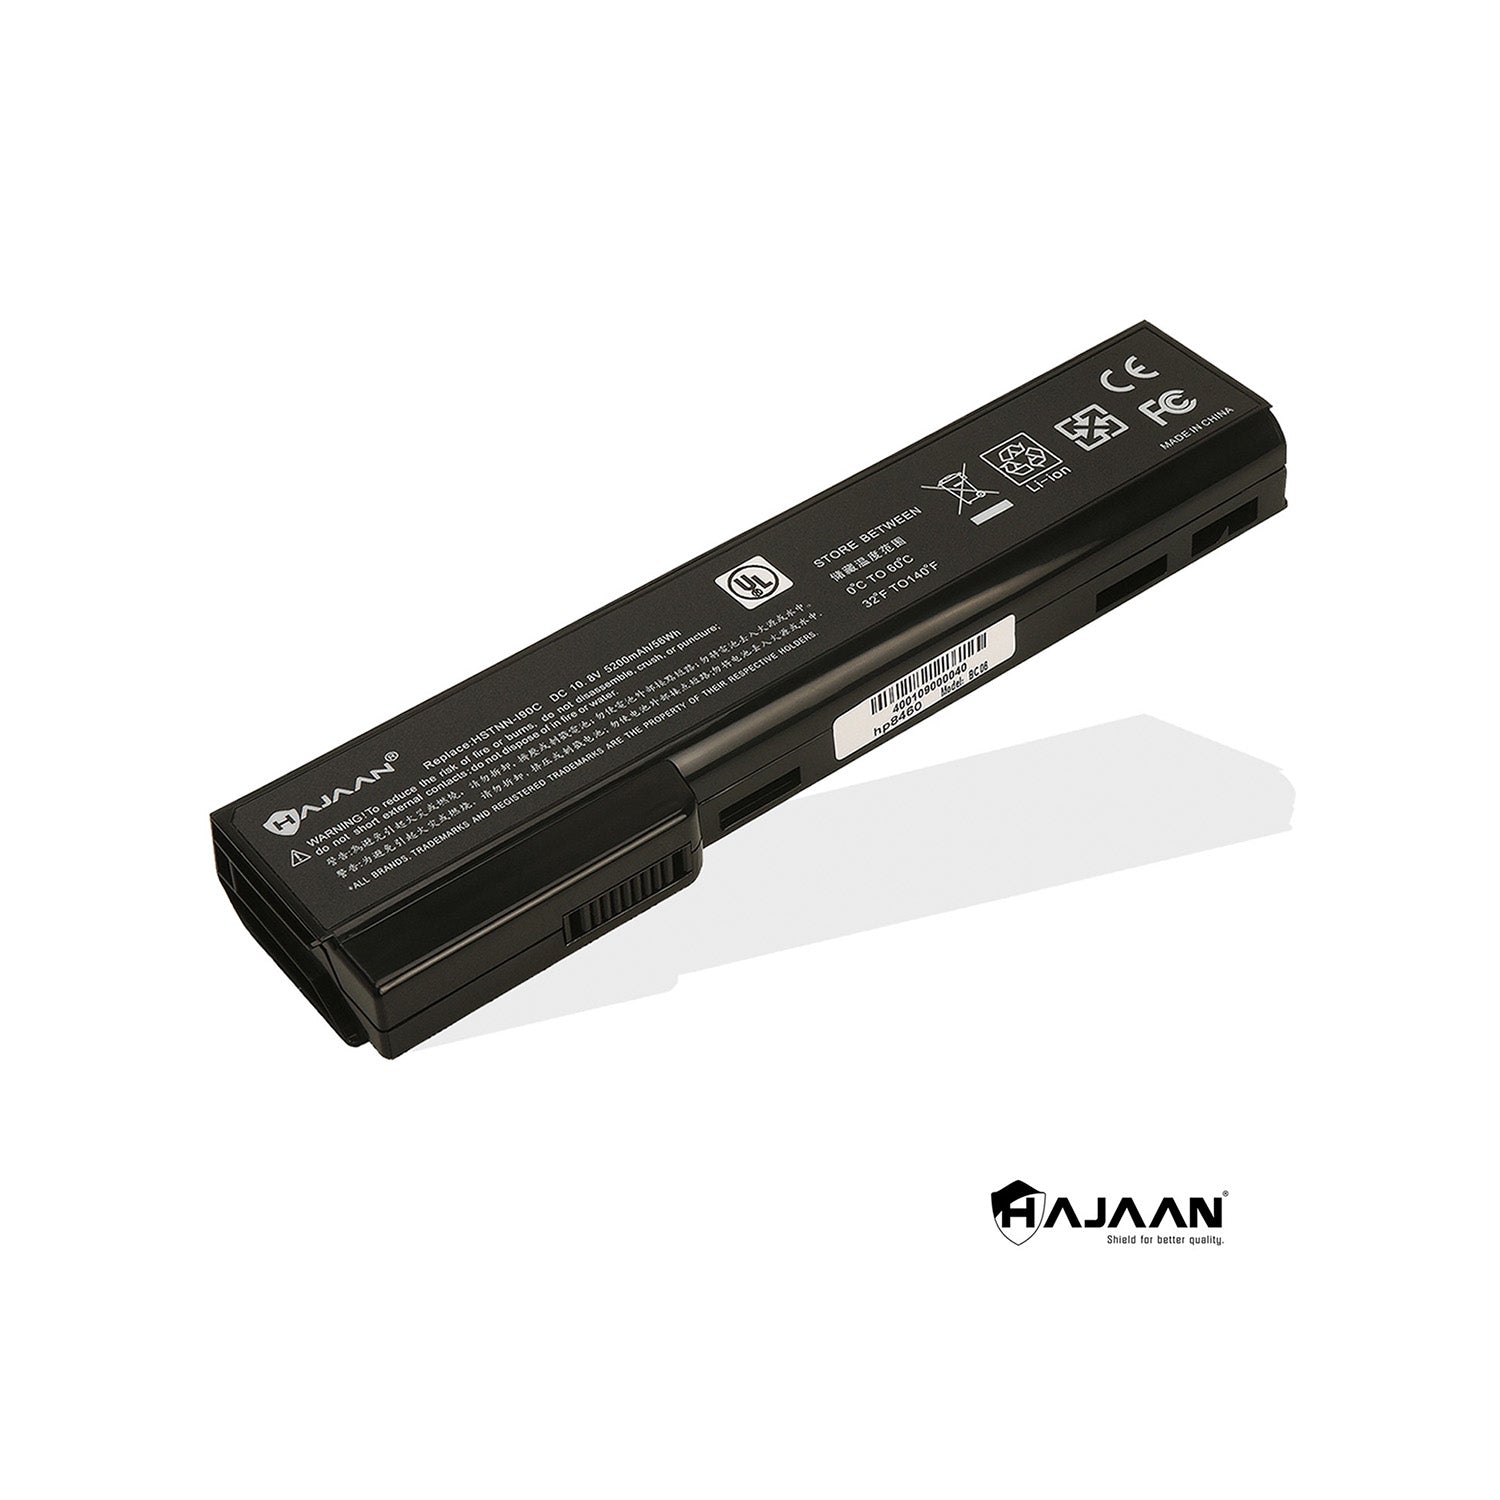 HAJAAN Replacement Laptop battery for HP EliteBook 8460p, ProBook 6360b, 6460b, 6465b, 6470b,6475b HSTNN-I90C (Li-ion, 5200mAh/56Wh, 6-Cells,10.8 V,) , 1 Year Warranty